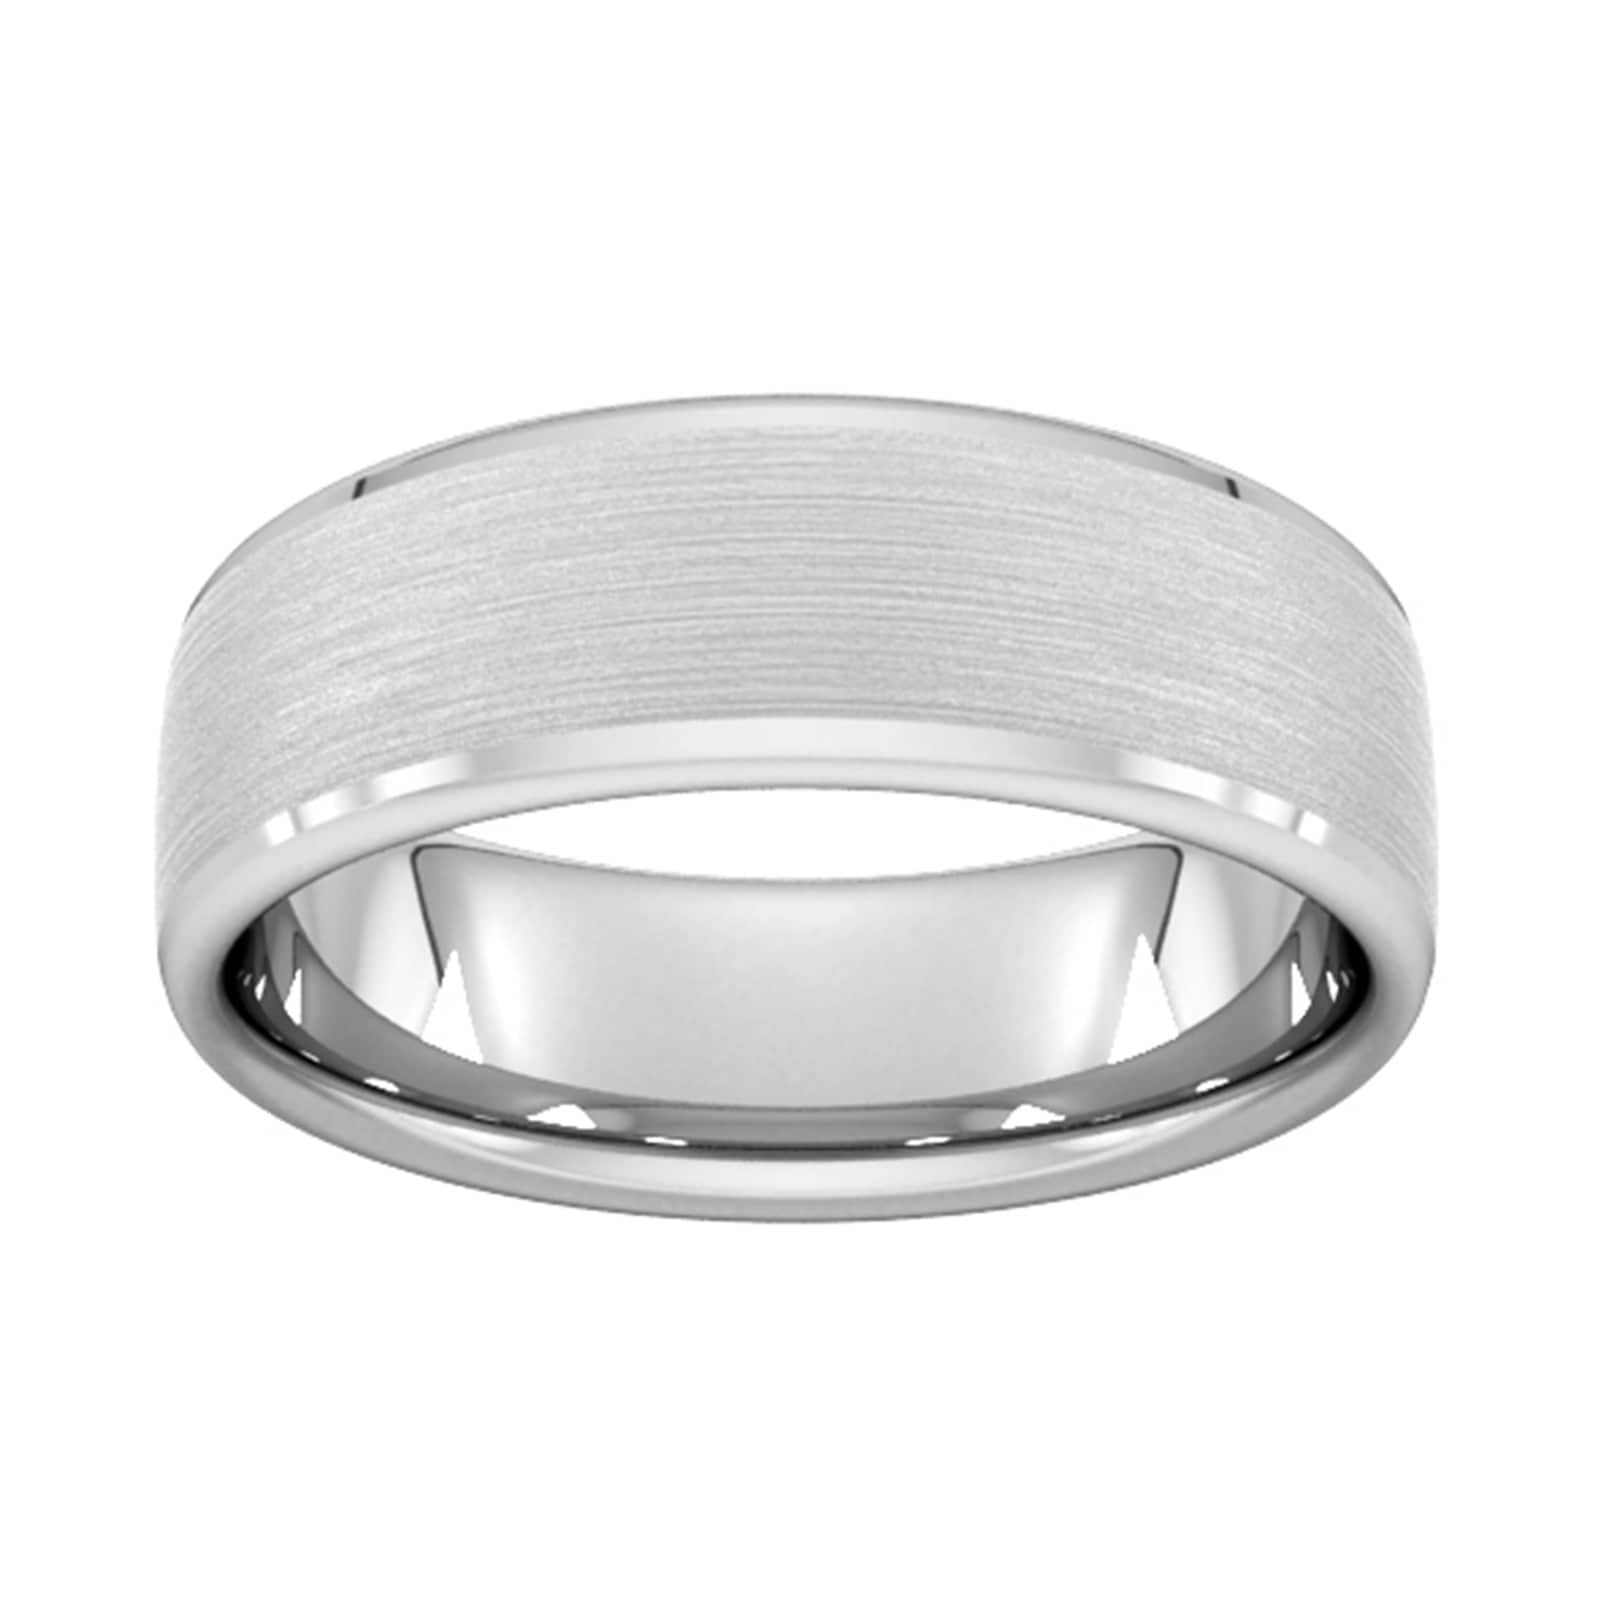 7mm Slight Court Standard Polished Chamfered Edges With Matt Centre Wedding Ring In 18 Carat White Gold - Ring Size G